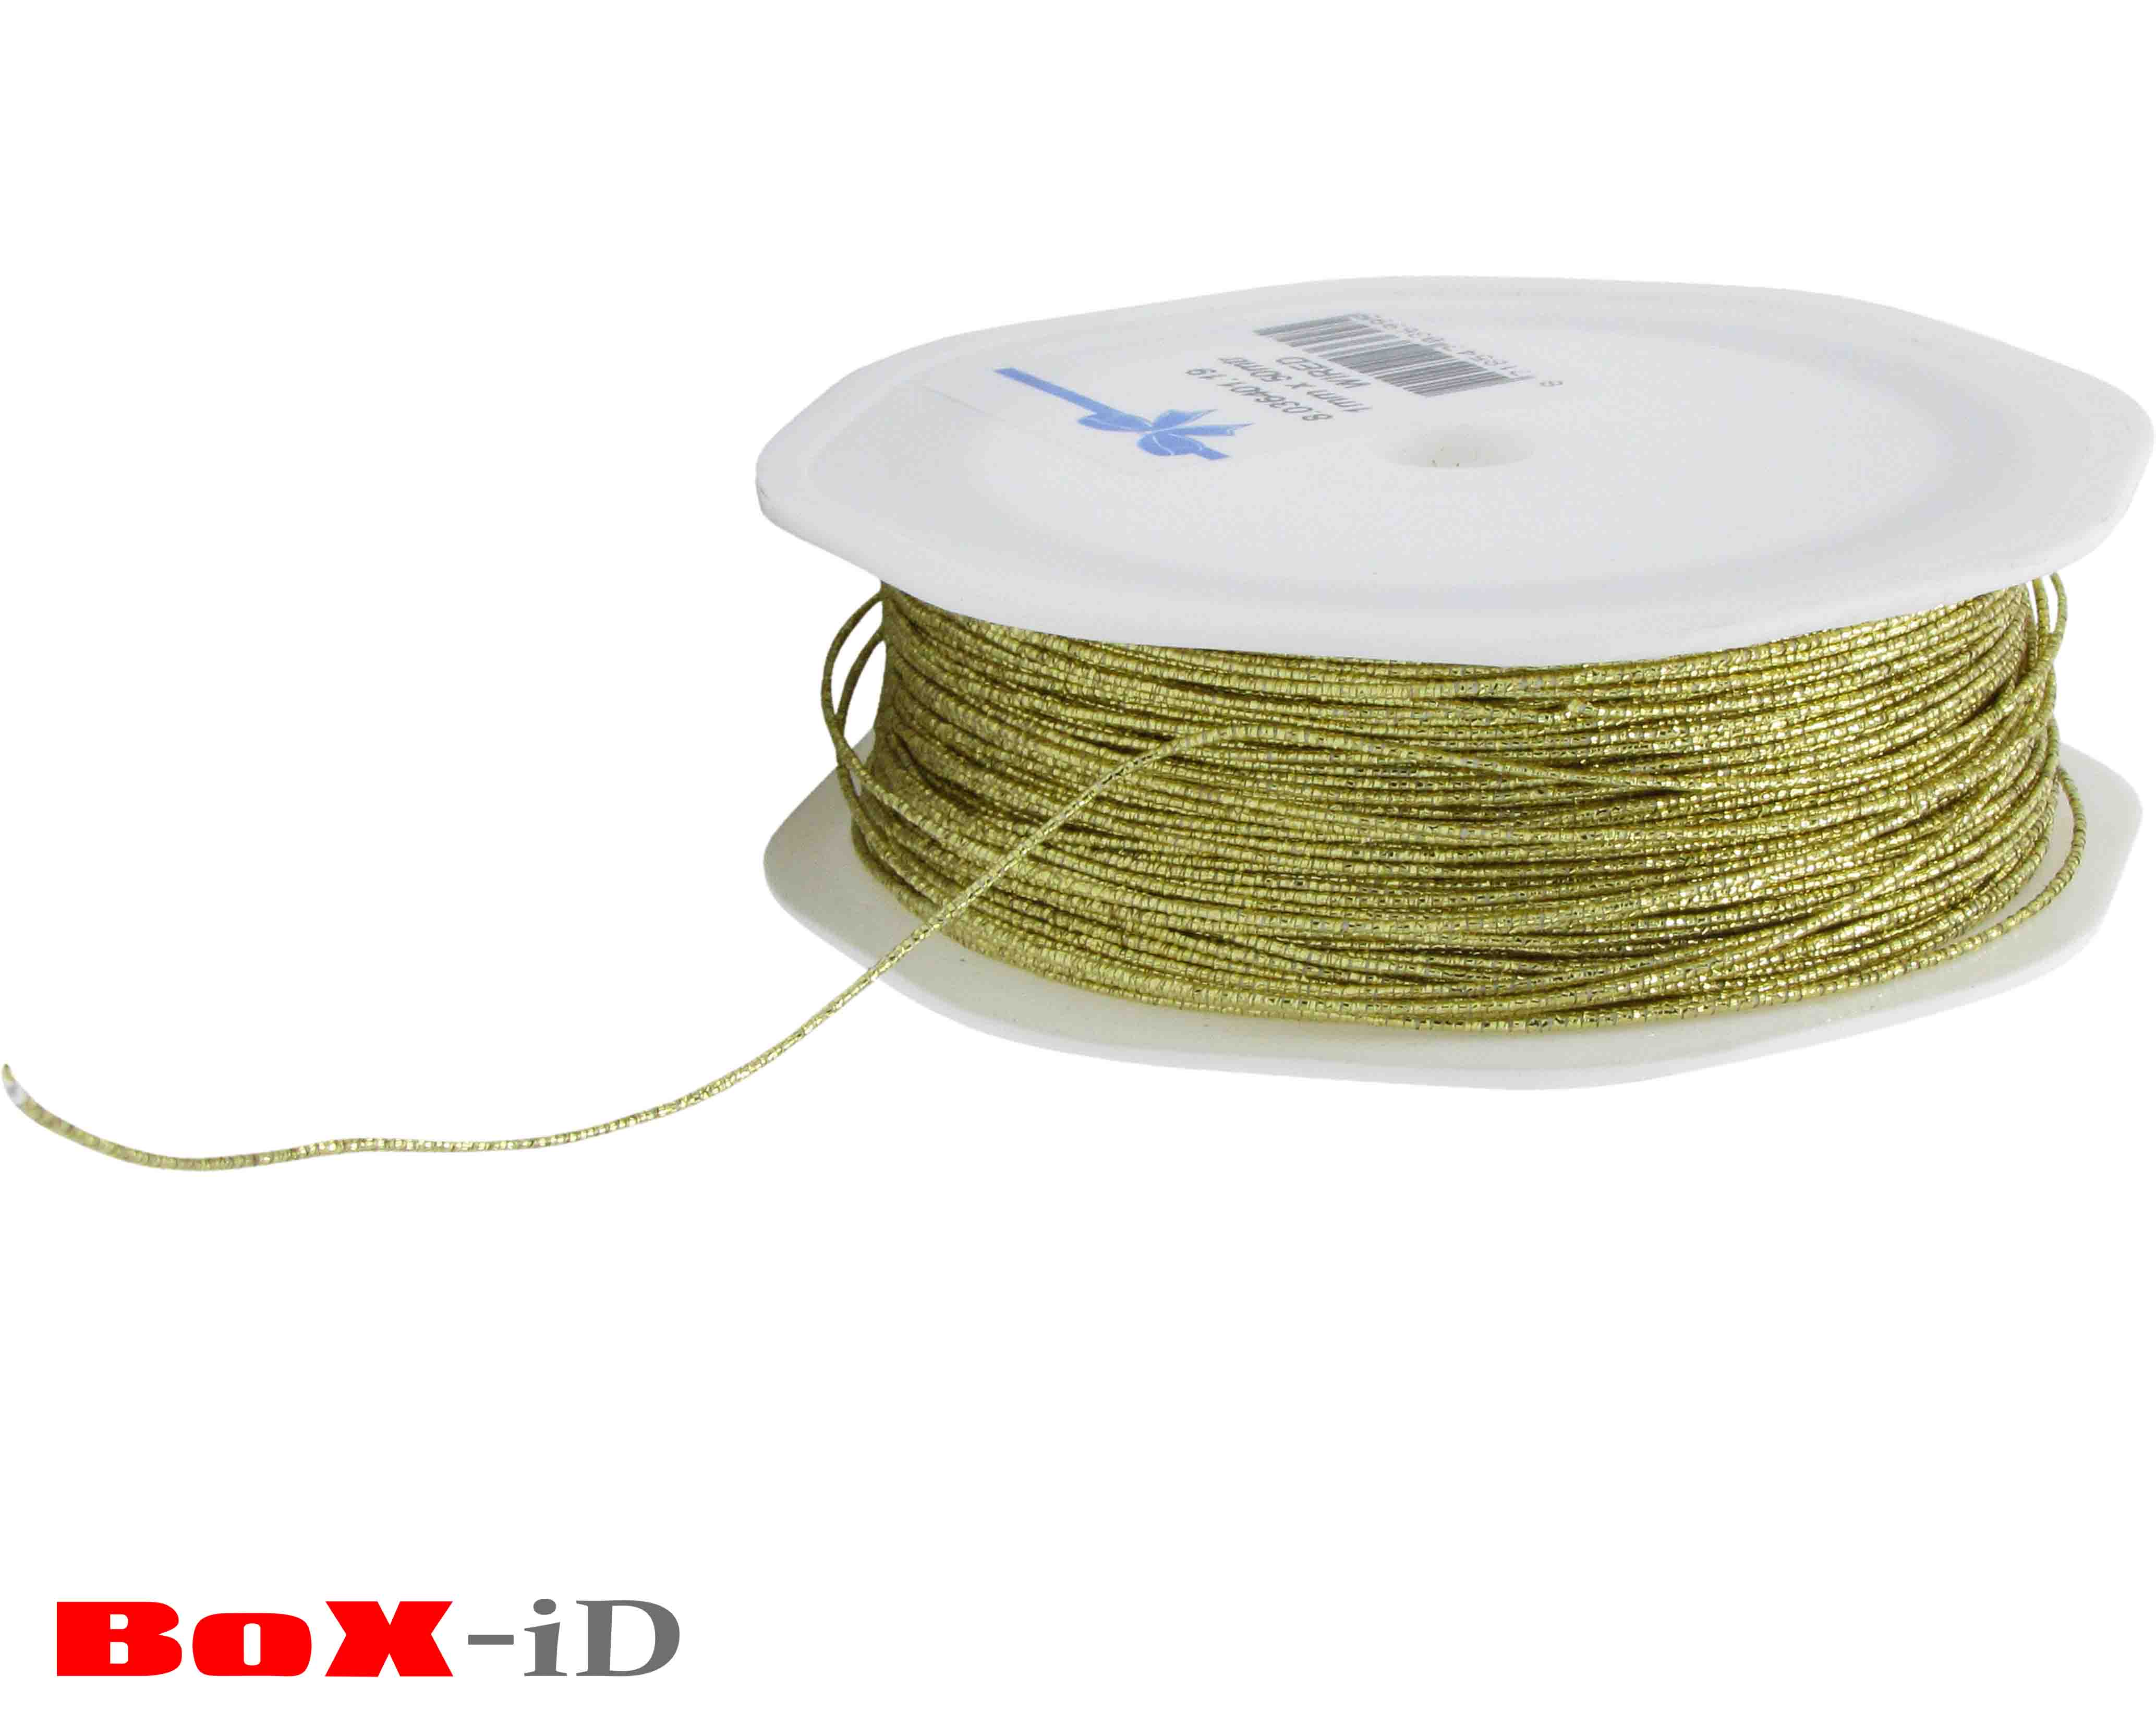 Metal cord wired goud 1mm x 50m